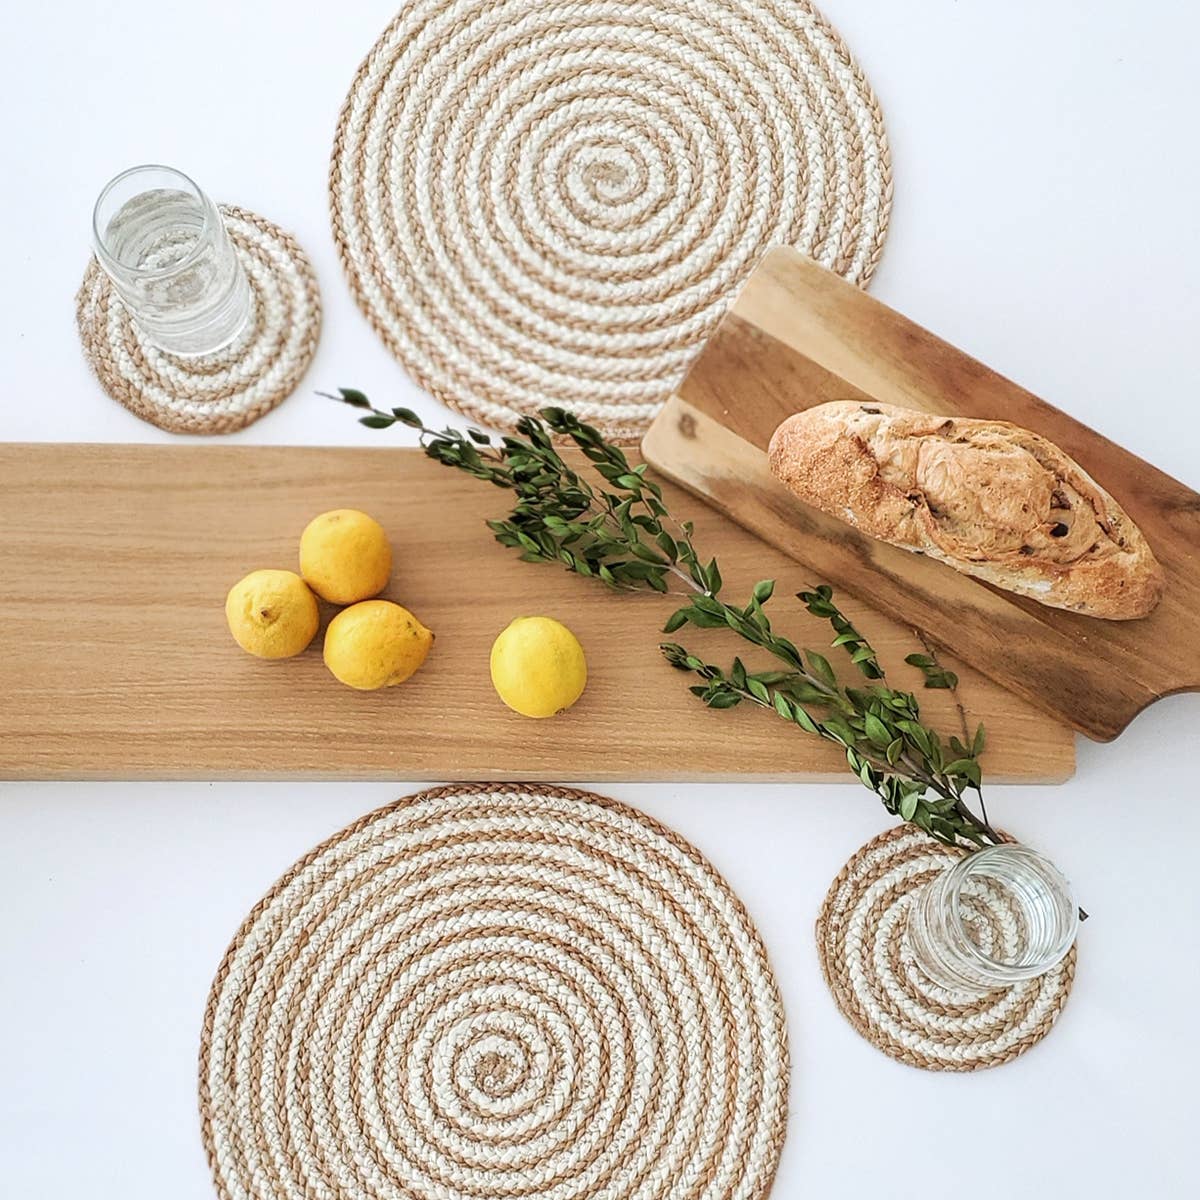 spiral placemats and coasters by wooden boards and greenery 